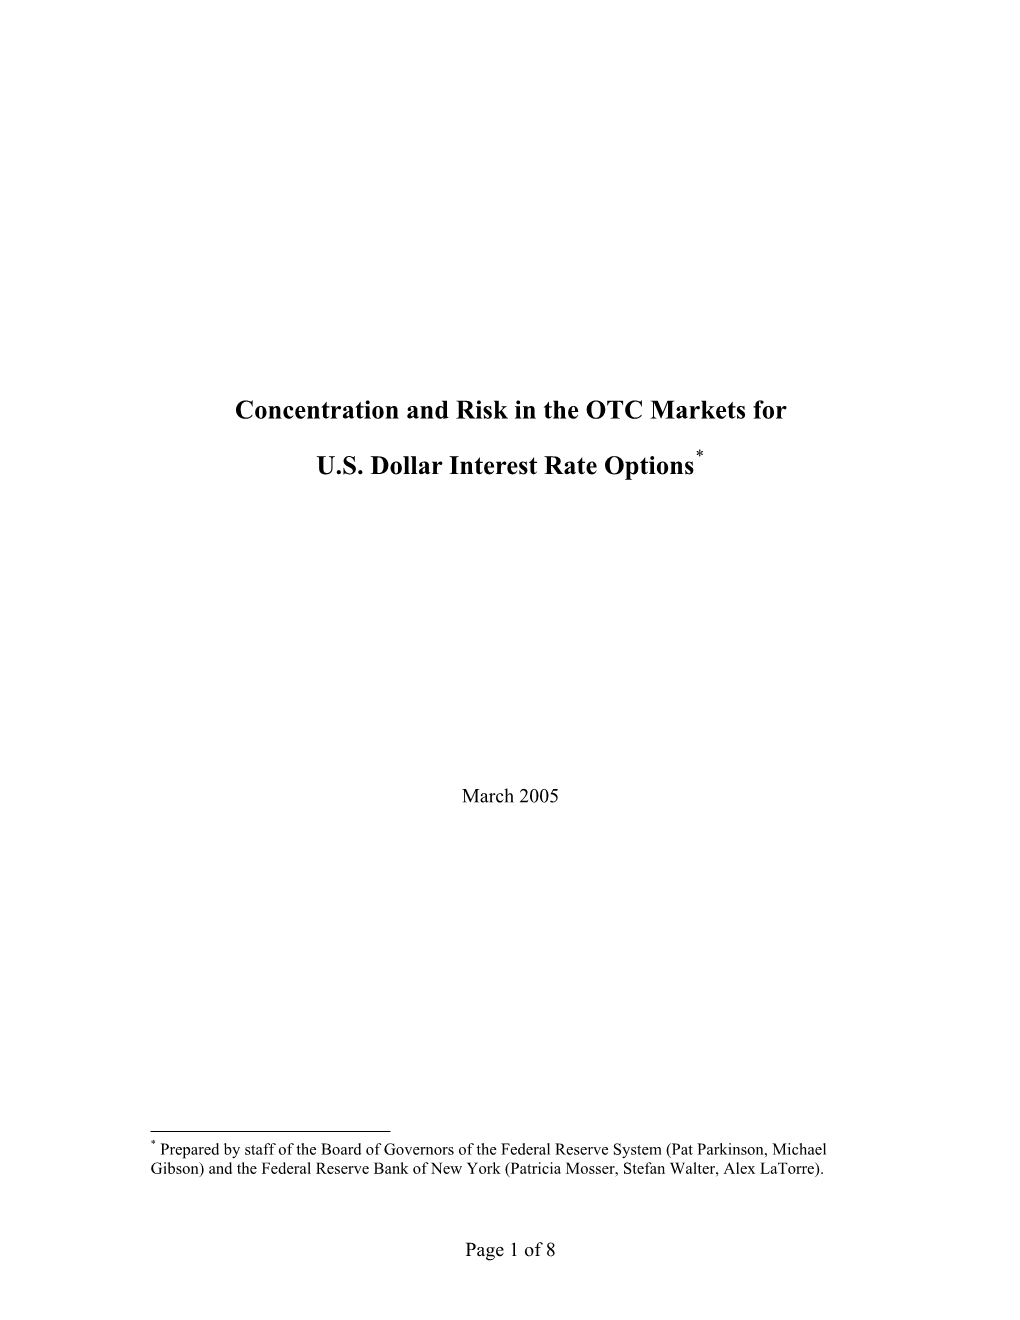 Concentration and Risk in the OTC Markets for U.S. Dollar Interest Rate Options